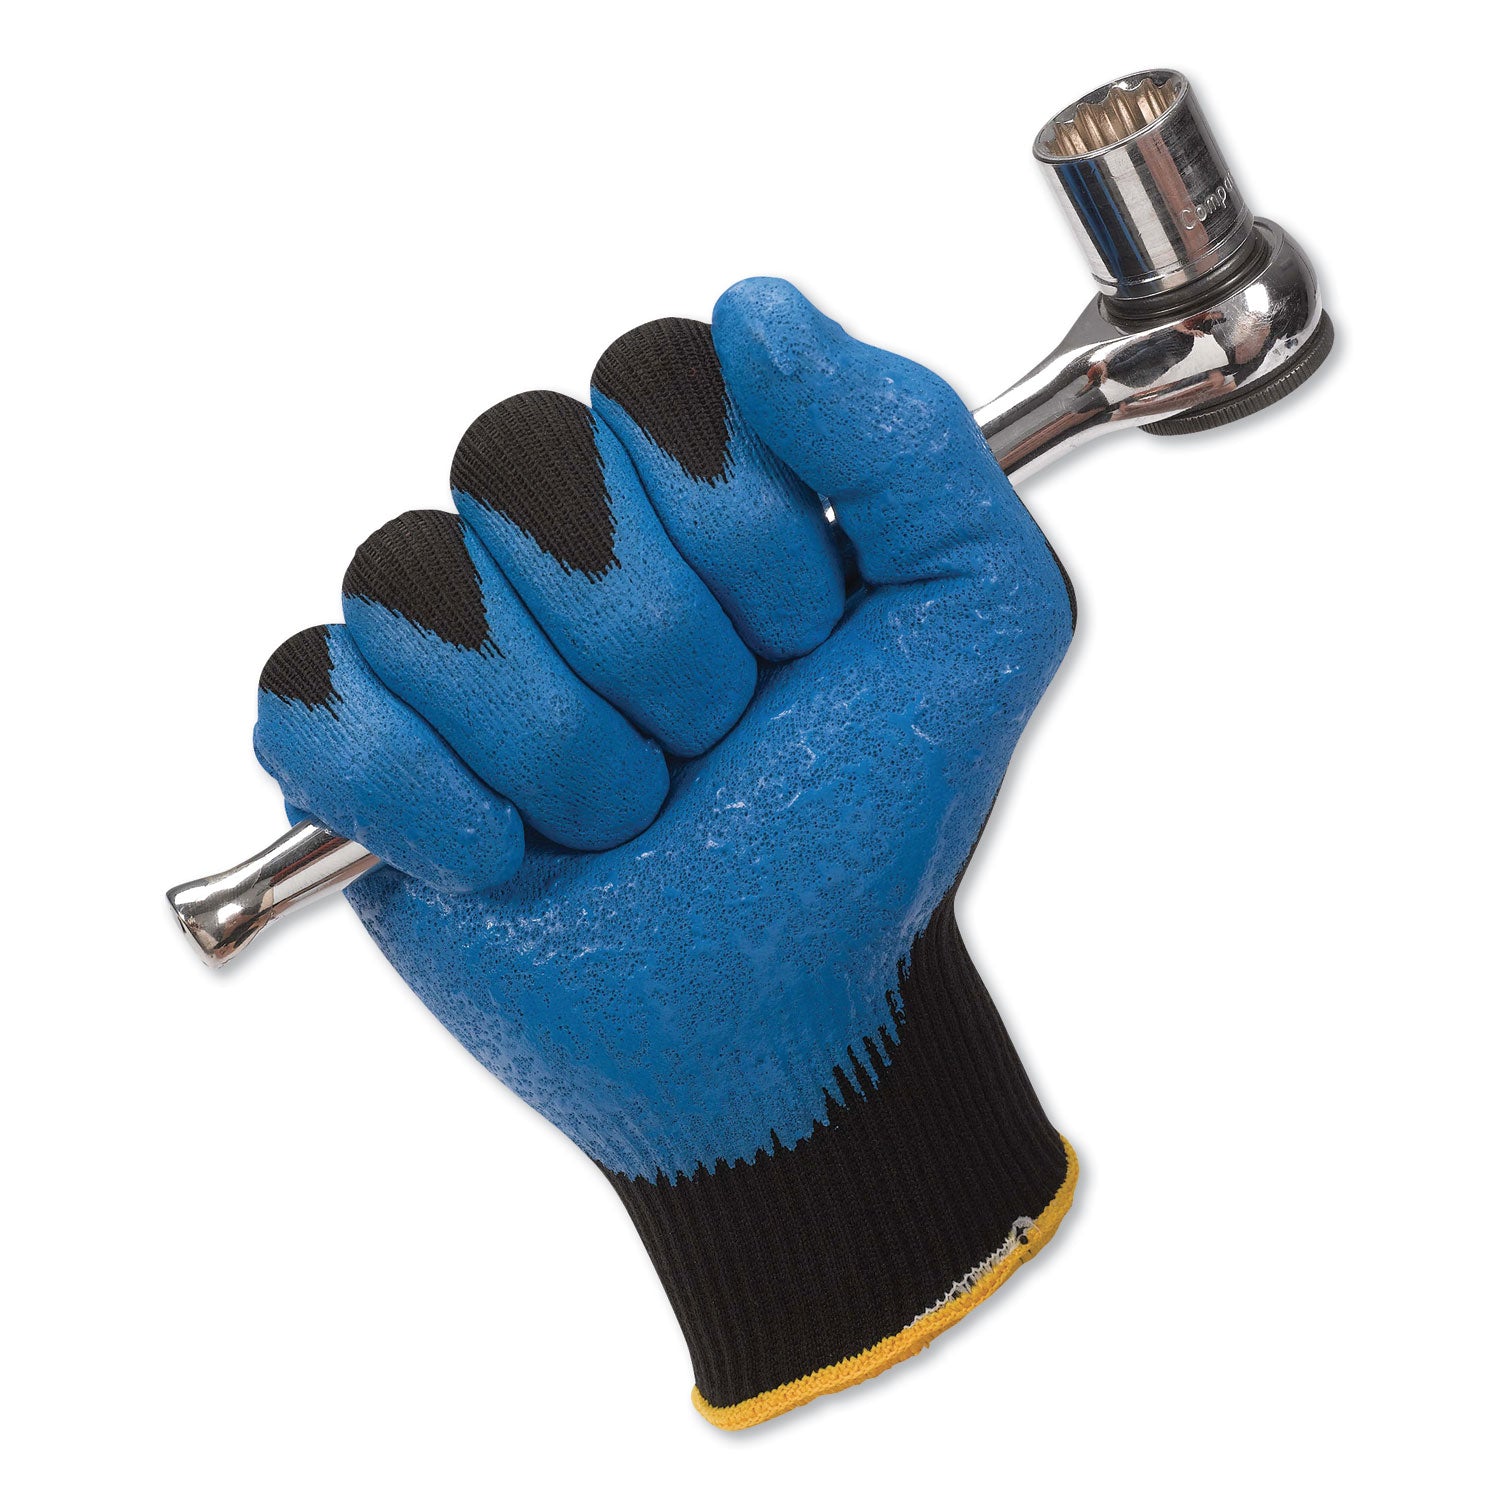 g40-foam-nitrile-coated-gloves-250-mm-length-x-large-size-10-blue-12-pairs_kcc40228 - 3